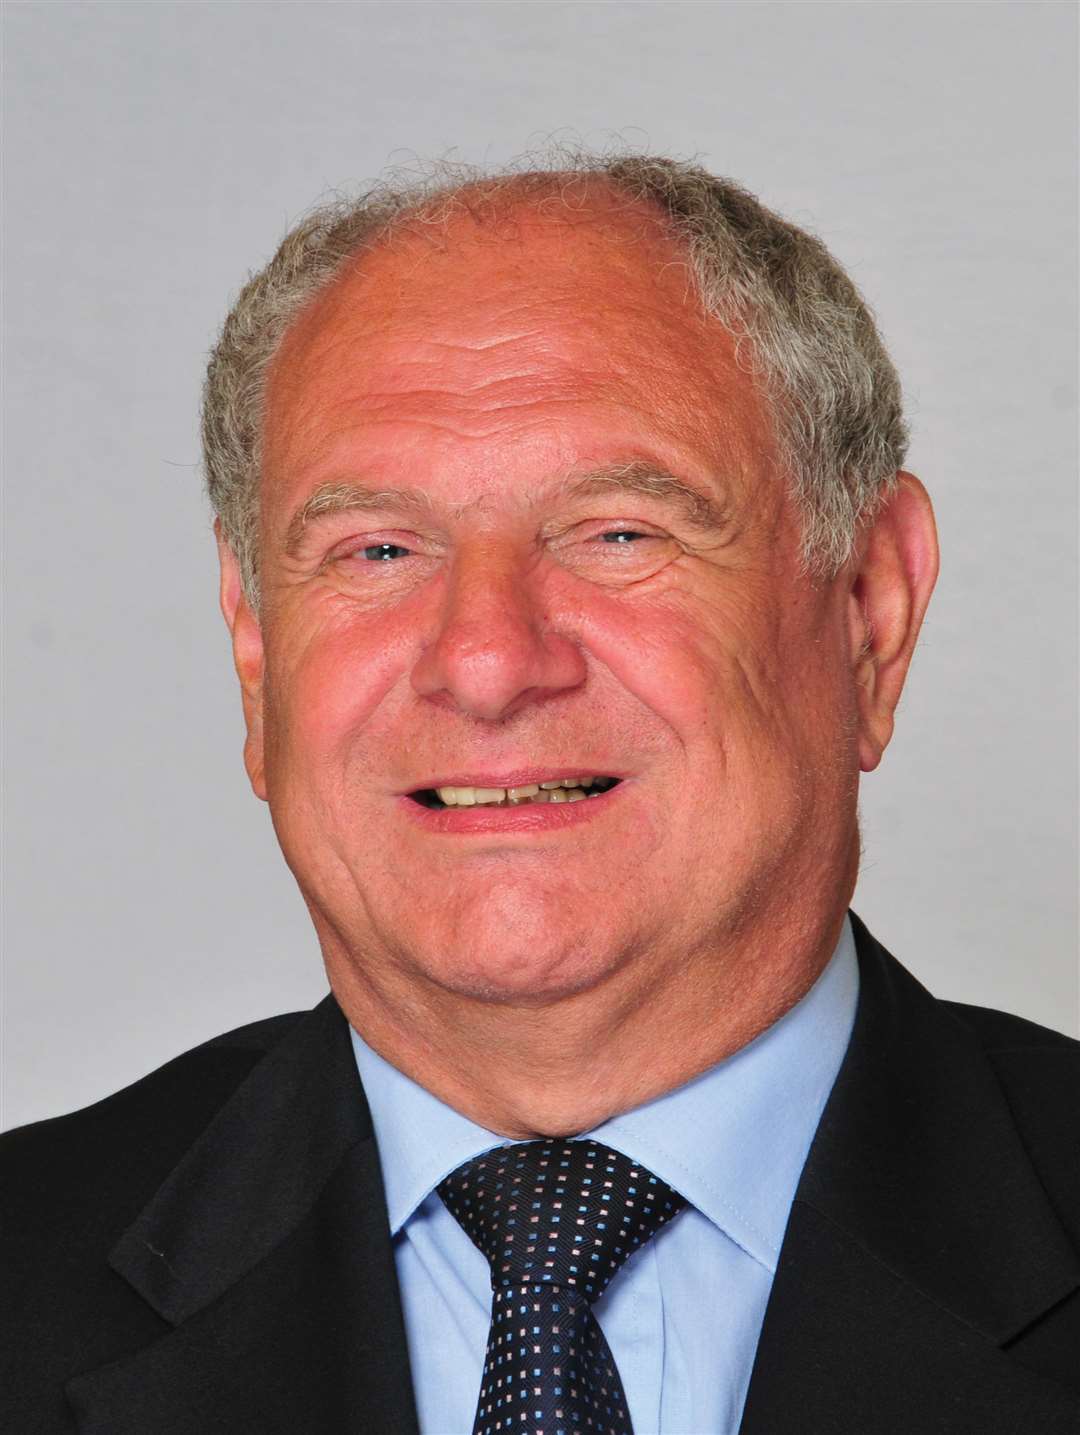 Cllr David Brake, Medway Council cabinet member for public health and chairman of the Medway Health and Wellbeing Board